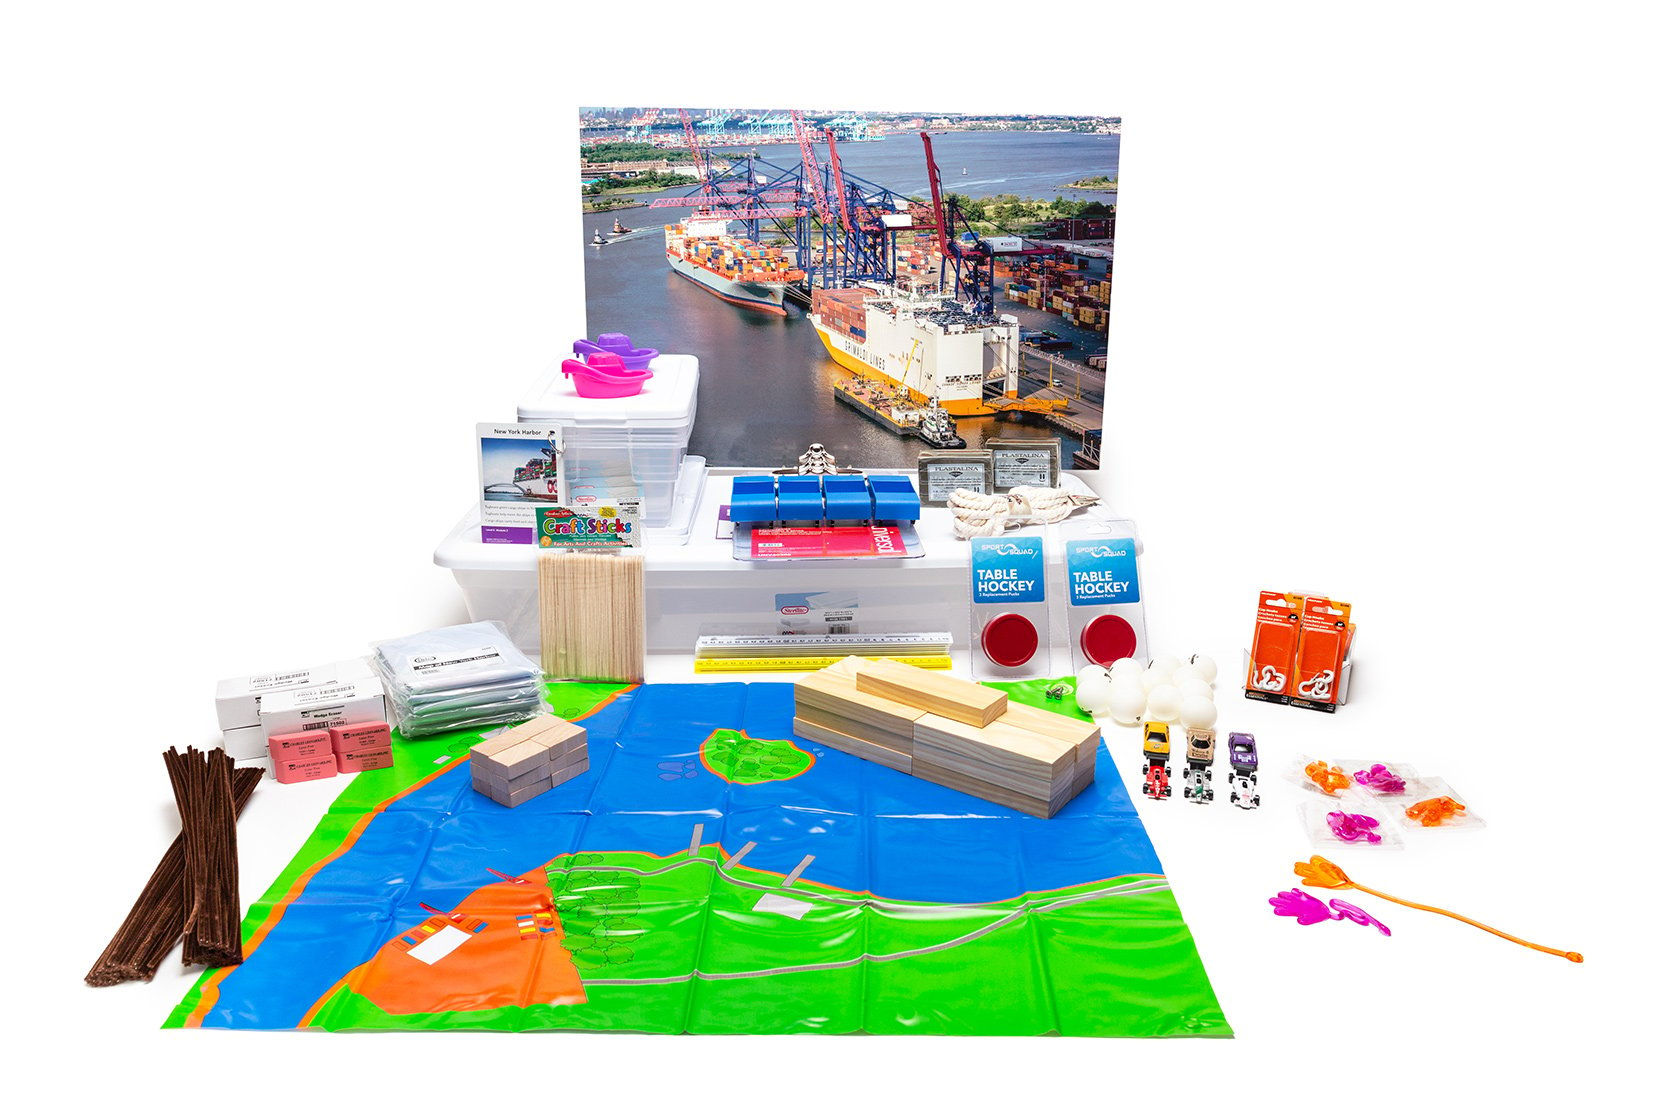 PhD Science hands-on materials kit from Level K Module 2 that includes vinyl harbor maps, wooden blocks, and Knowledge Deck cards and poster